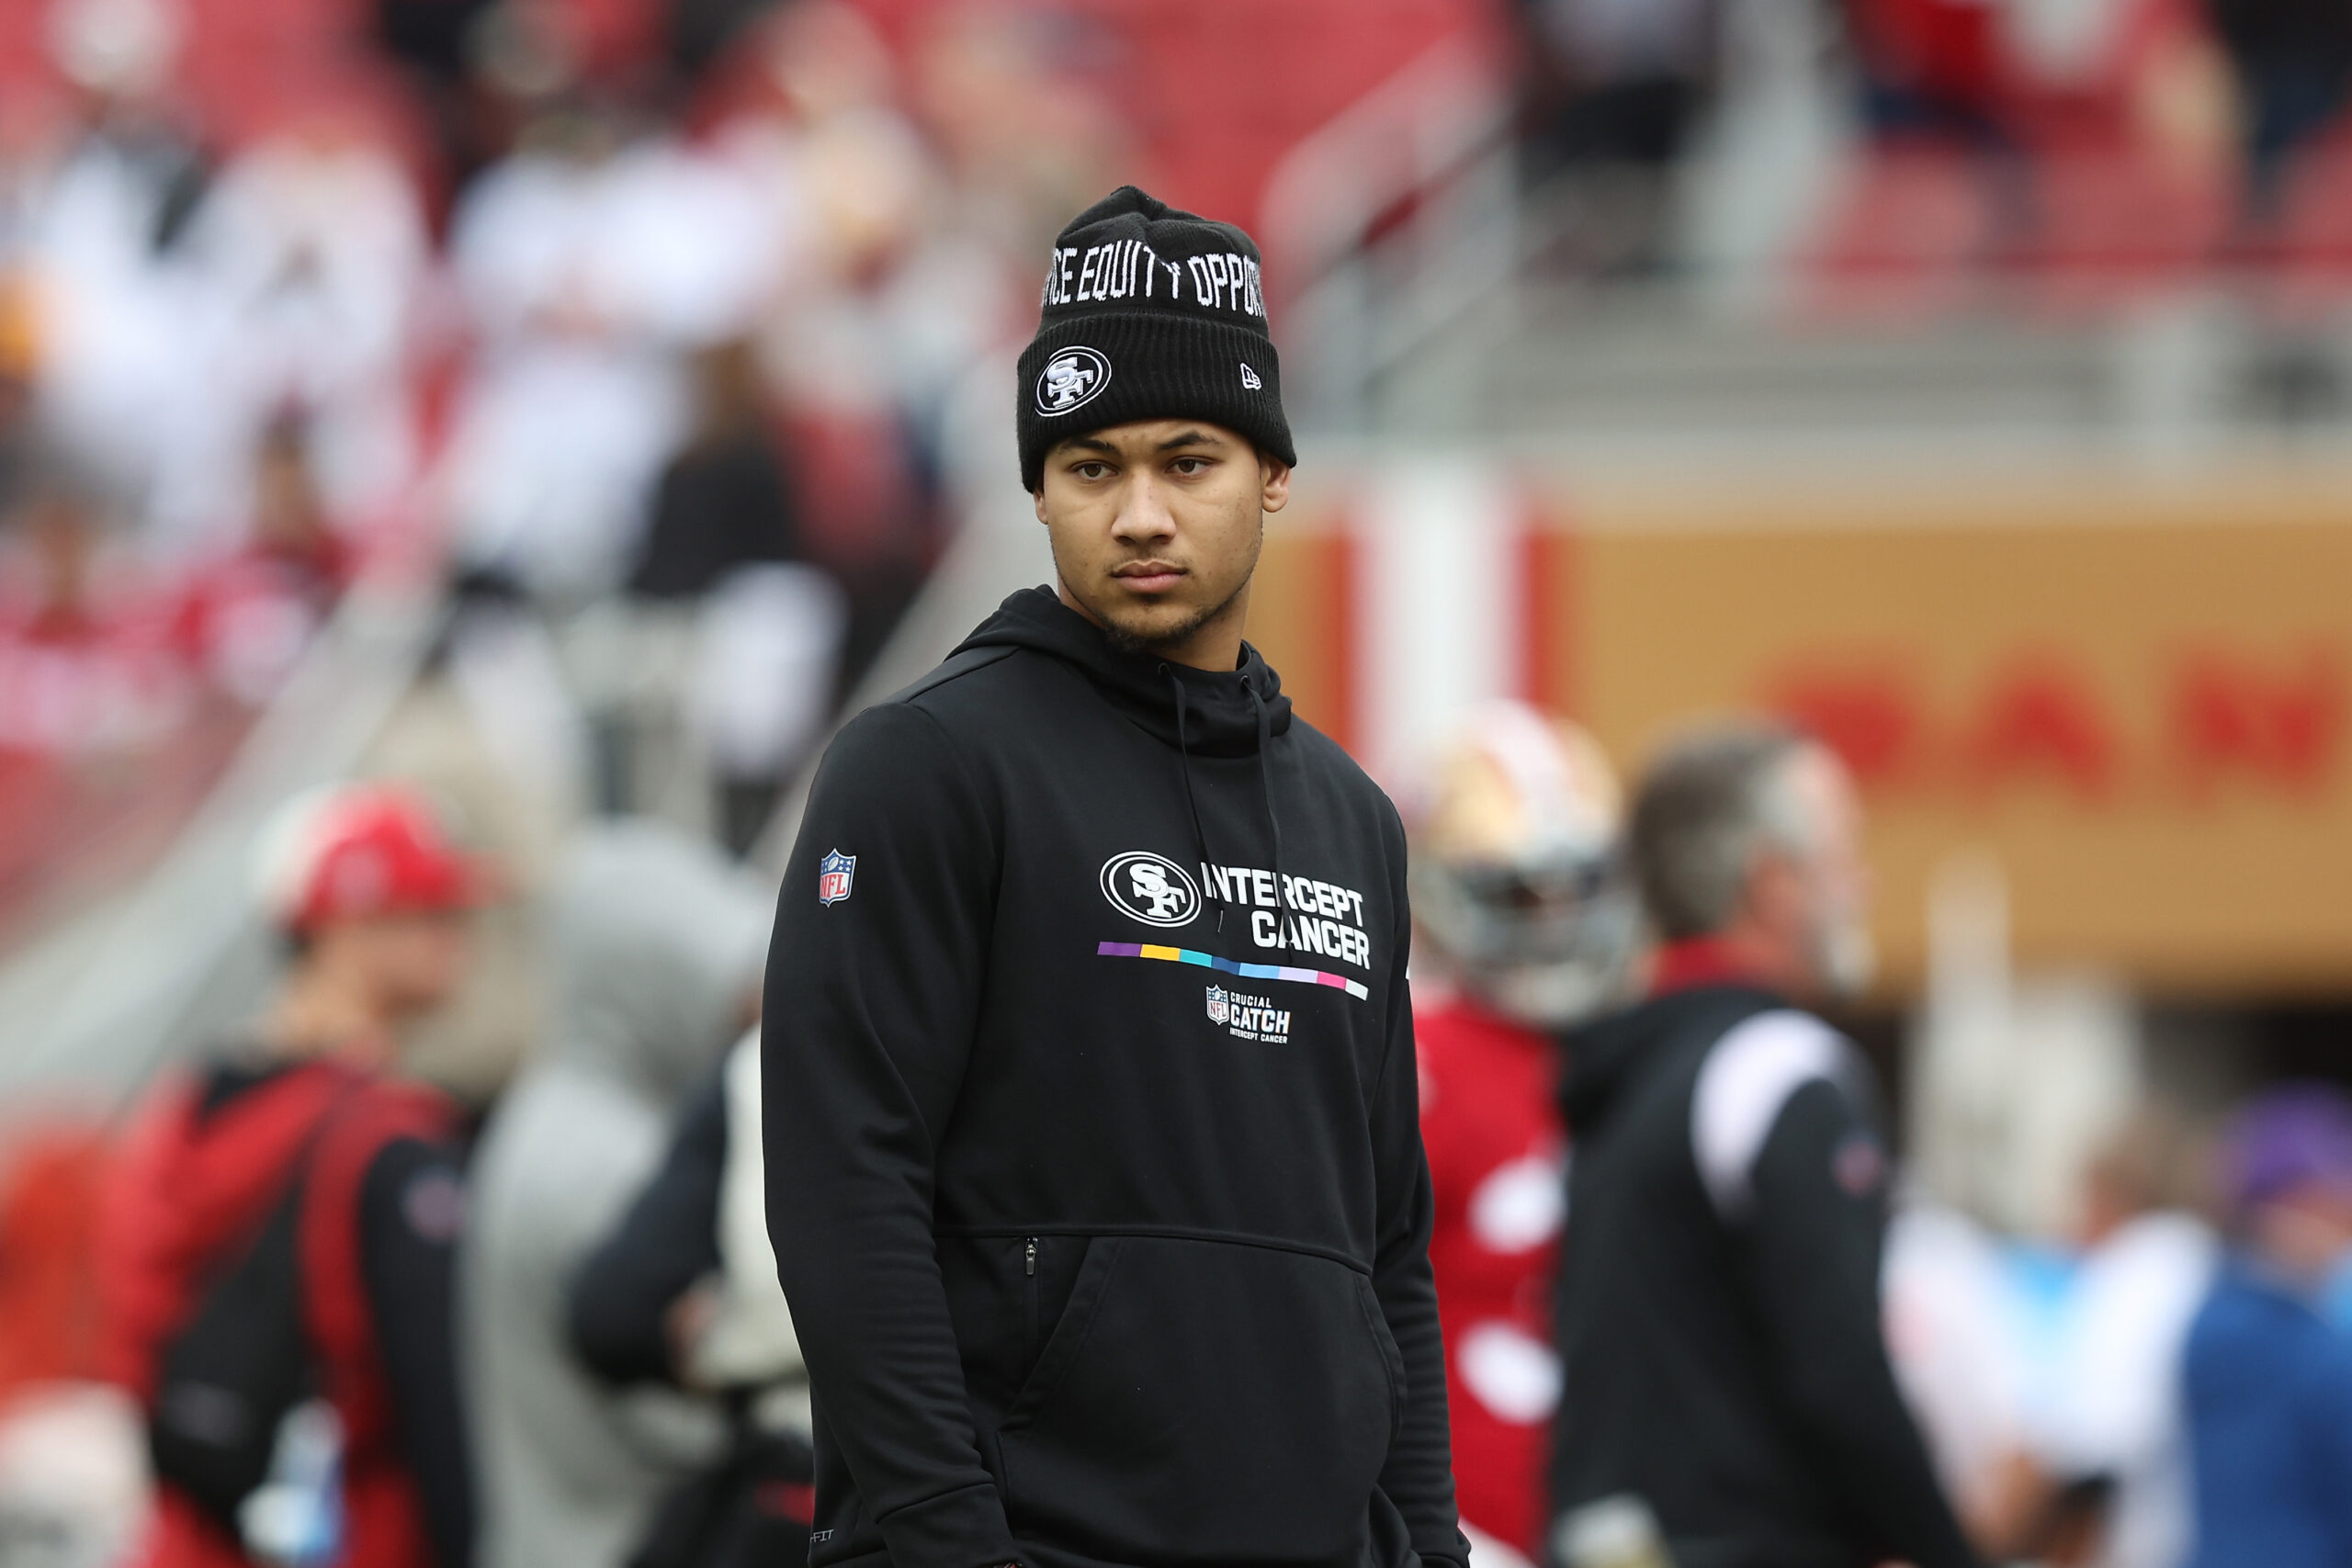 SANTA CLARA, CALIFORNIA - DECEMBER 11: Trey Lance #5 of the San Francisco 49ers looks on before the game against the Tampa Bay Buccaneers at Levi's Stadium on December 11, 2022 in Santa Clara, California. (Photo by Lachlan Cunningham/Getty Images)